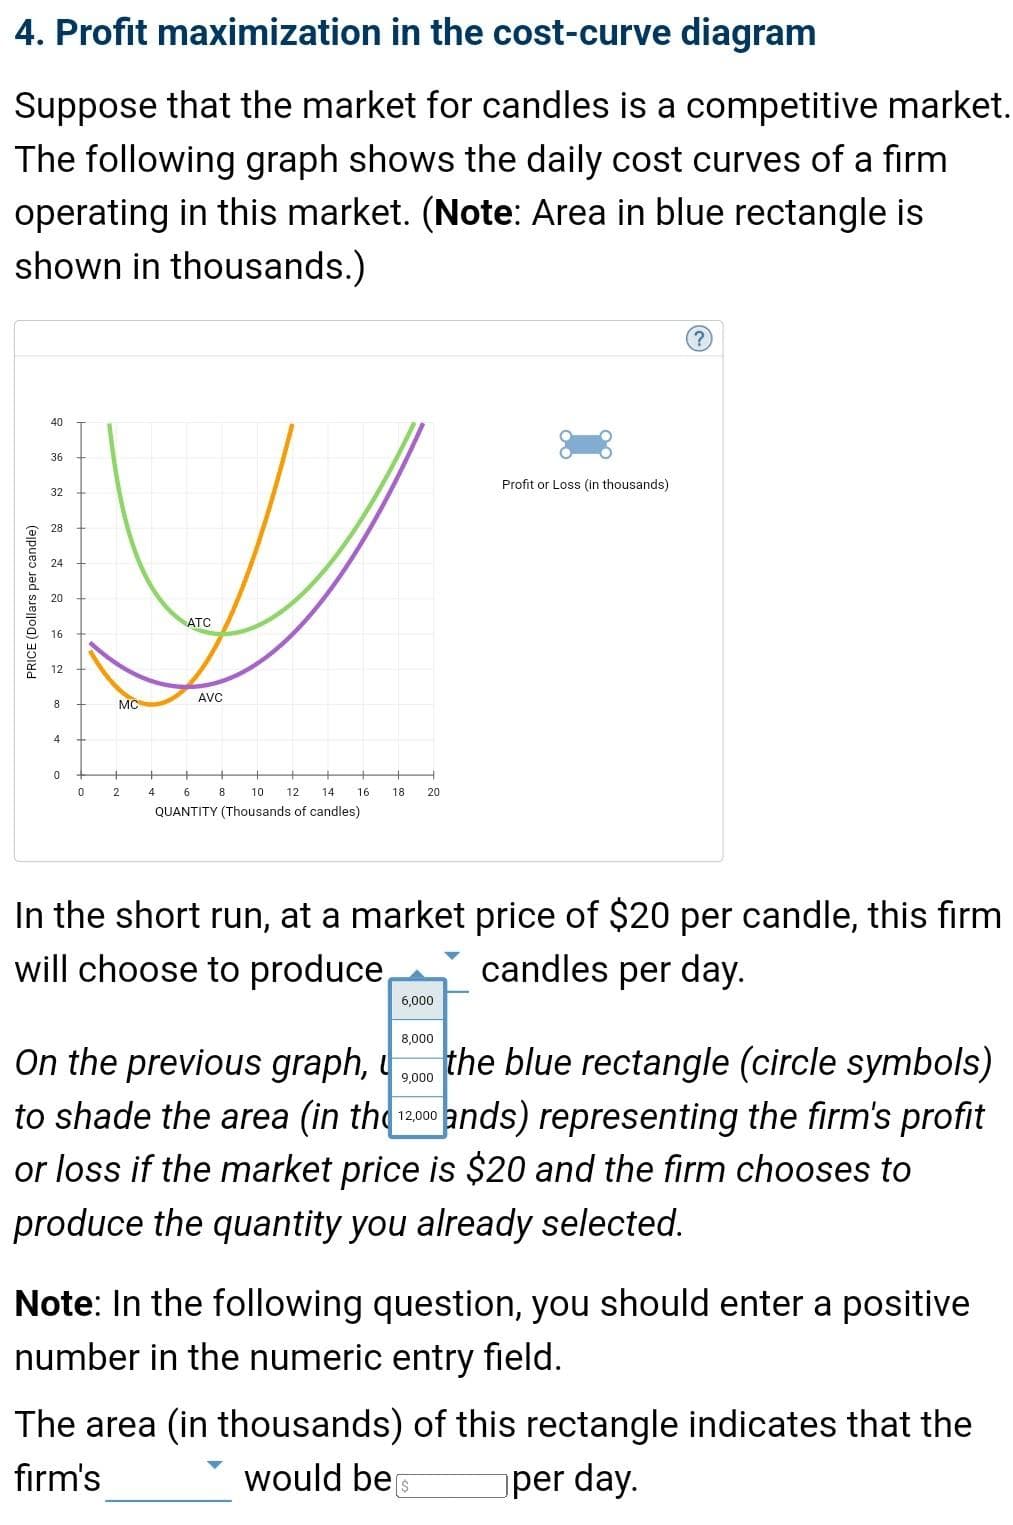 4. Profit maximization in the cost-curve diagram
Suppose that the market for candles is a competitive market.
The following graph shows the daily cost curves of a firm
operating in this market. (Note: Area in blue rectangle is
shown in thousands.)
32
28
V
24
ATC
AVC
MC
PRICE (Dollars per candle)
40
36
8
4
0
0
+
2
4
8
6
10
QUANTITY (Thousands of candles)
12 14 16 18. 20
6,000
In the short run, at a market price of $20 per candle, this firm
will choose to produce
candles per day.
8,000
Profit or Loss (in thousands)
?
On the previous graph,
9,000
the blue rectangle (circle symbols)
to shade the area (in the 12000 ands) representing the firm's profit
or loss if the market price is $20 and the firm chooses to
produce the quantity you already selected.
Note: In the following question, you should enter a positive
number in the numeric entry field.
[$
The area (in thousands) of this rectangle indicates that the
firm's
would be
per day.